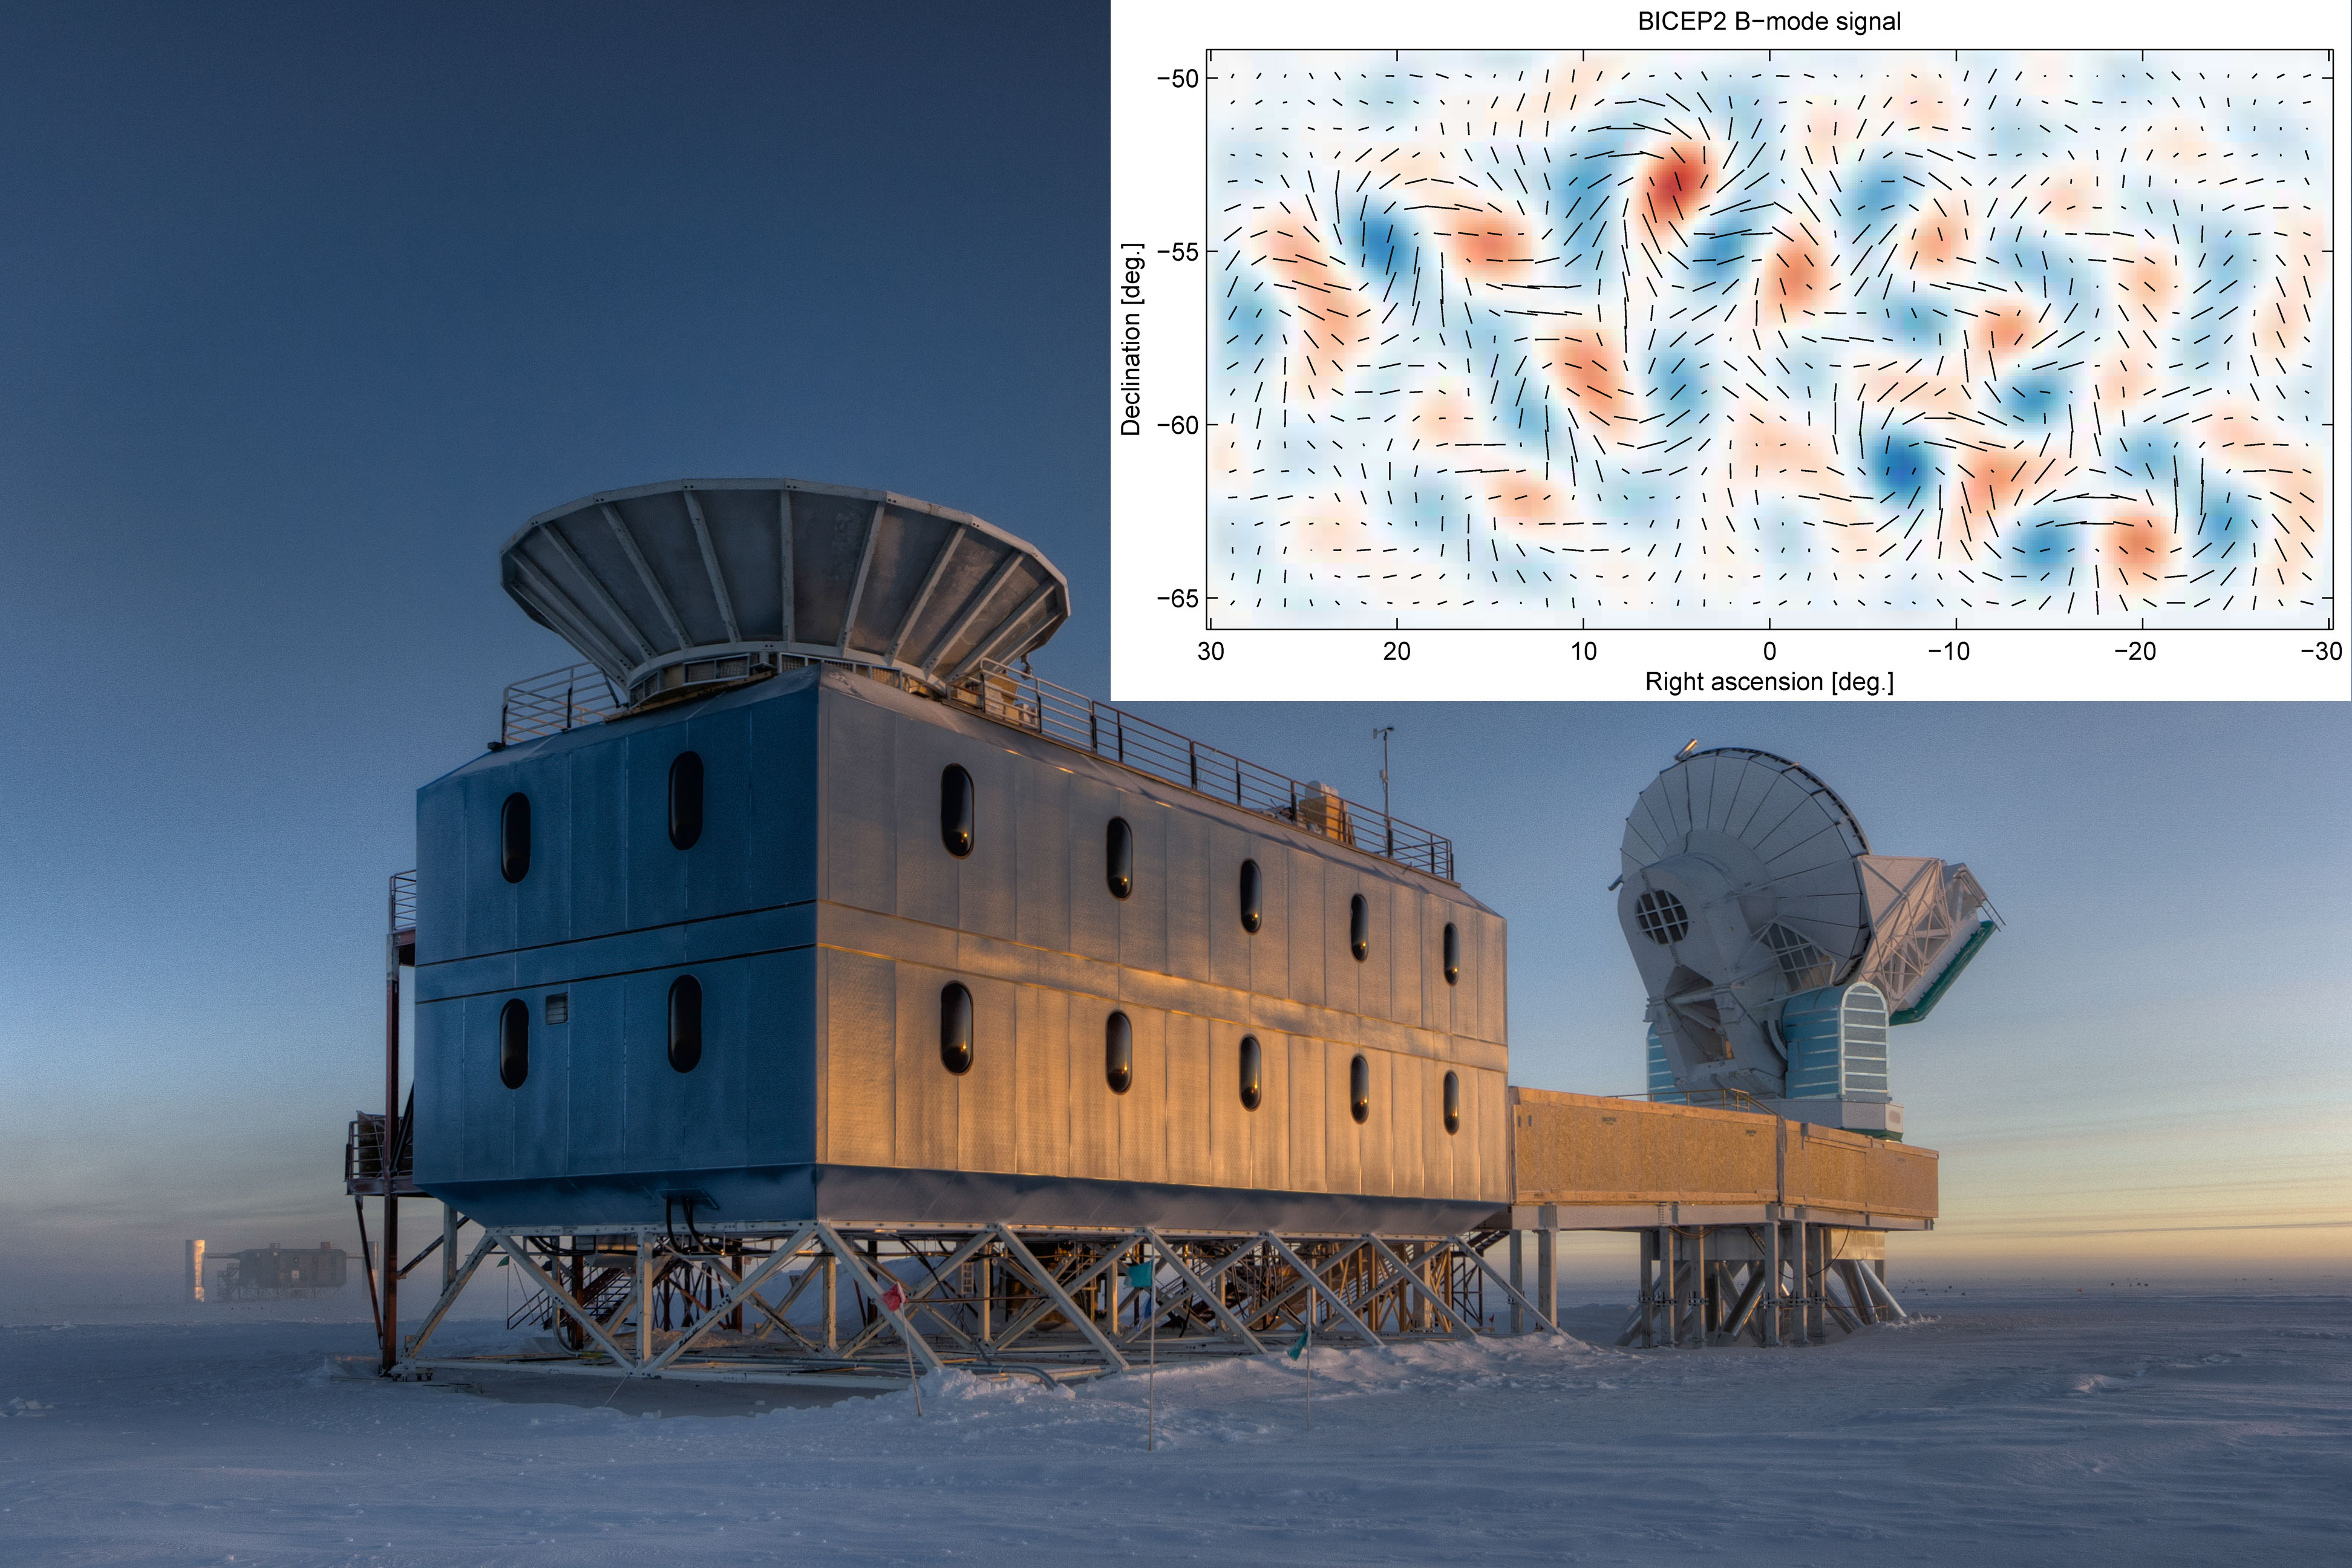 Figure 6: Photograph of the BICEP2 telescope in Antarctica with the measurement of the polarisation of the CMBR inset. The red and blue shading on the graph is an indication of the temperature of the CMBR, whilst the lines indicate the degree of B-mode polarisation measured. The degree of polarisation seems to be greatest at the extremes of temperature (though it should be noted that these extremes are actually only very small fluctuations). Image Credit: NASA